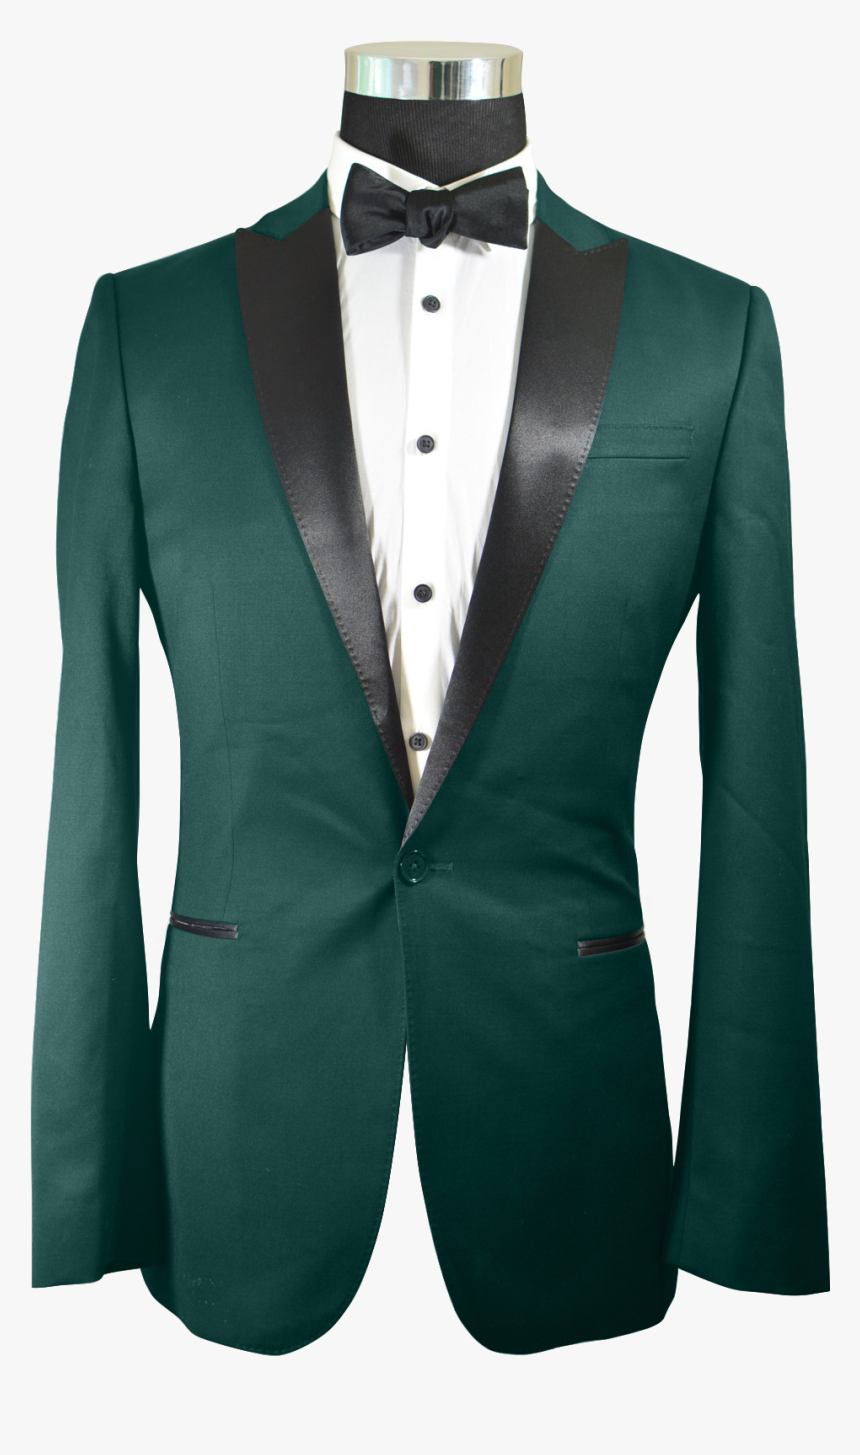 The Regal Forest Green Tuxedo - Forest Green Tuxedo Jacket, HD Png Download, Free Download